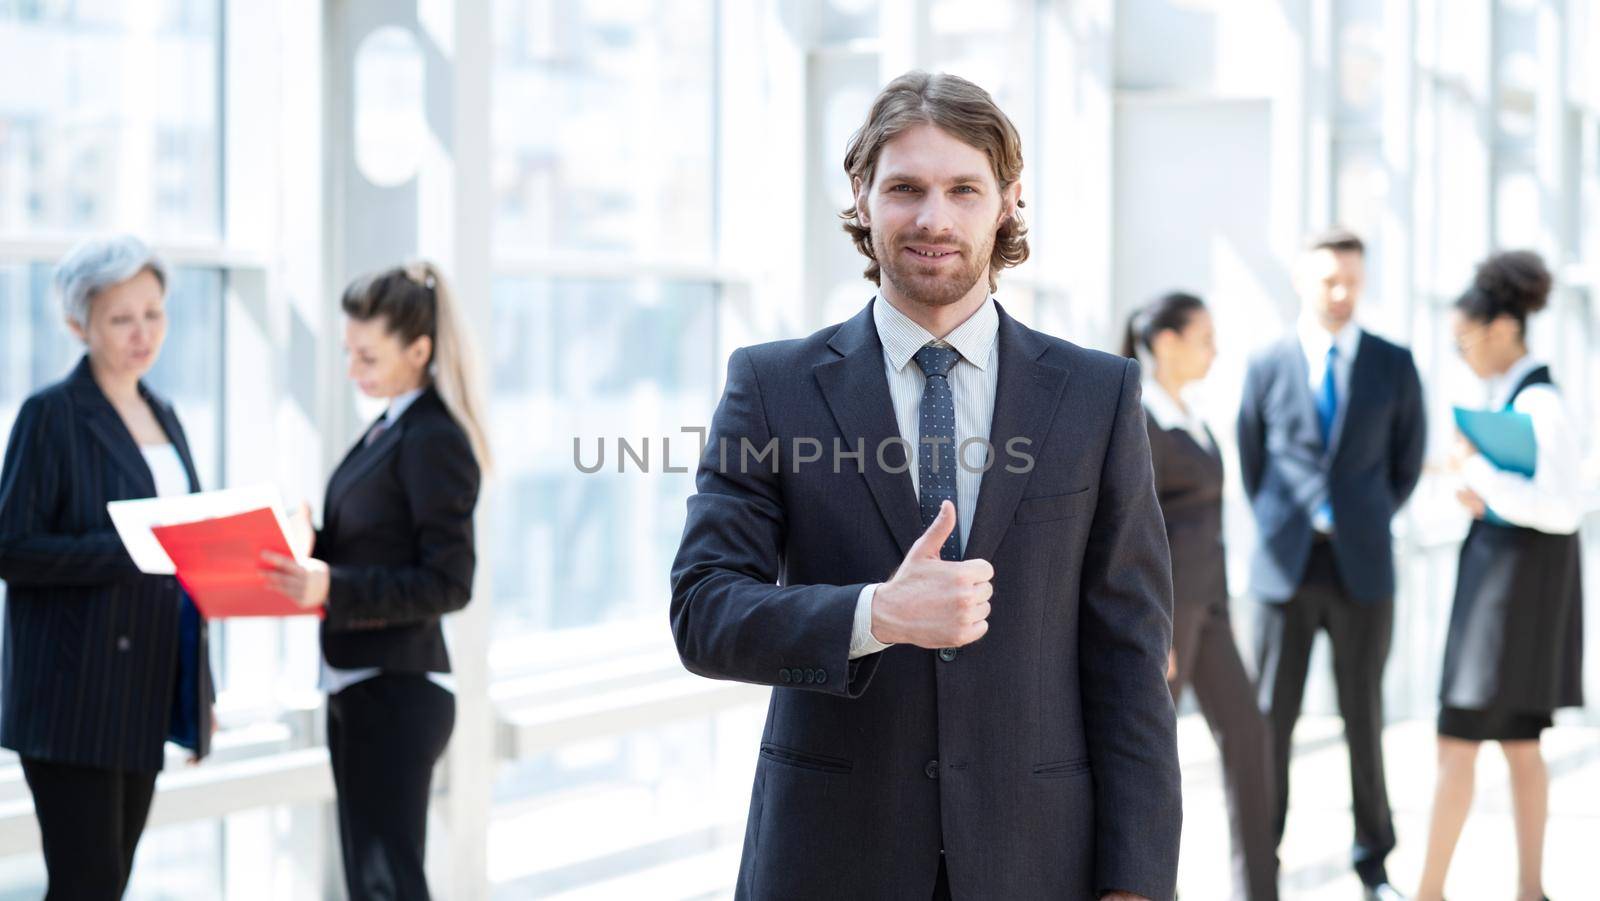 Hansome young businessman in formal suit standing with thumb up in front of colleagues in business building